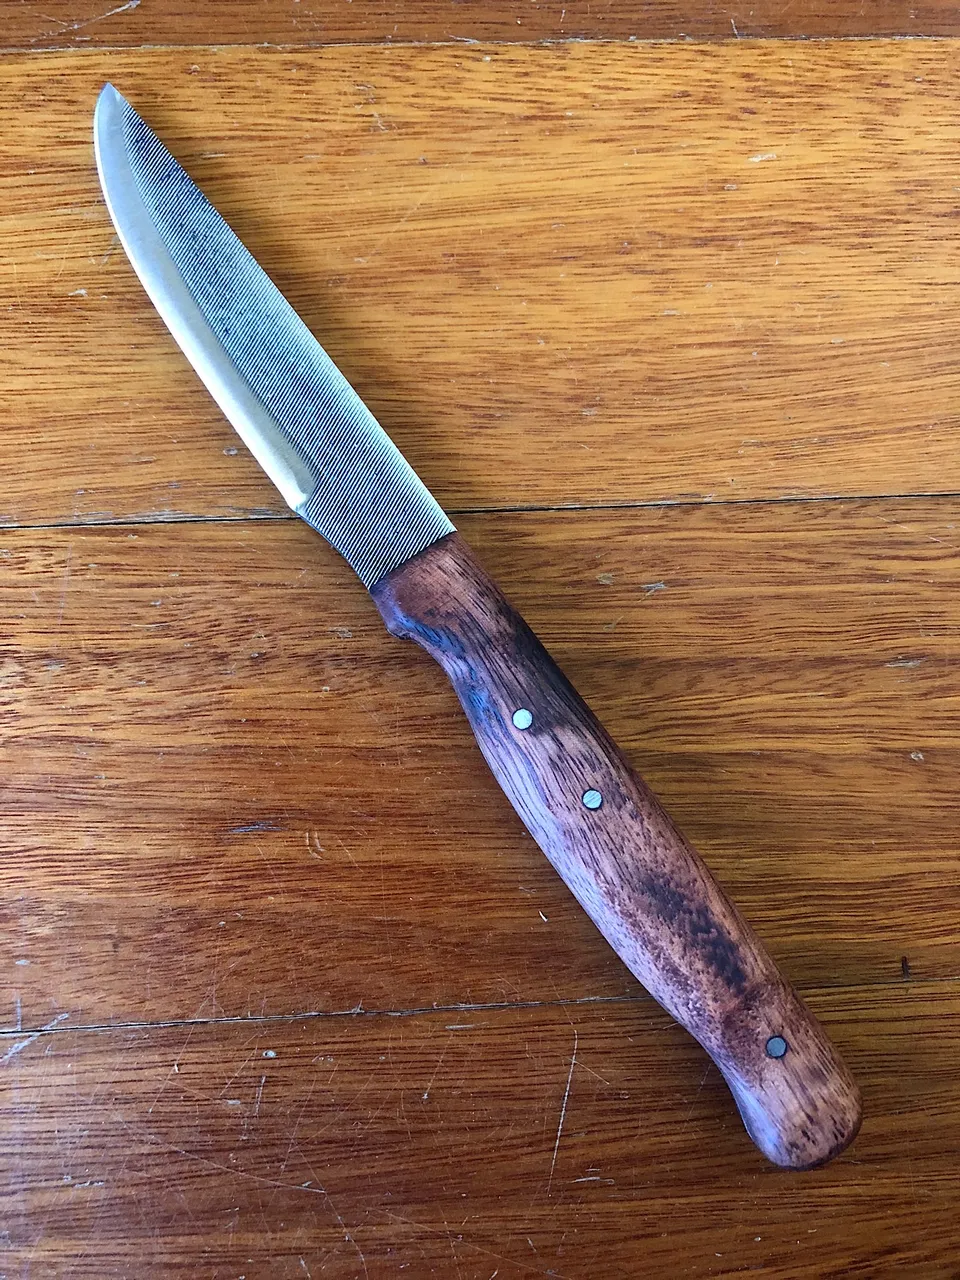 Knife from an old file